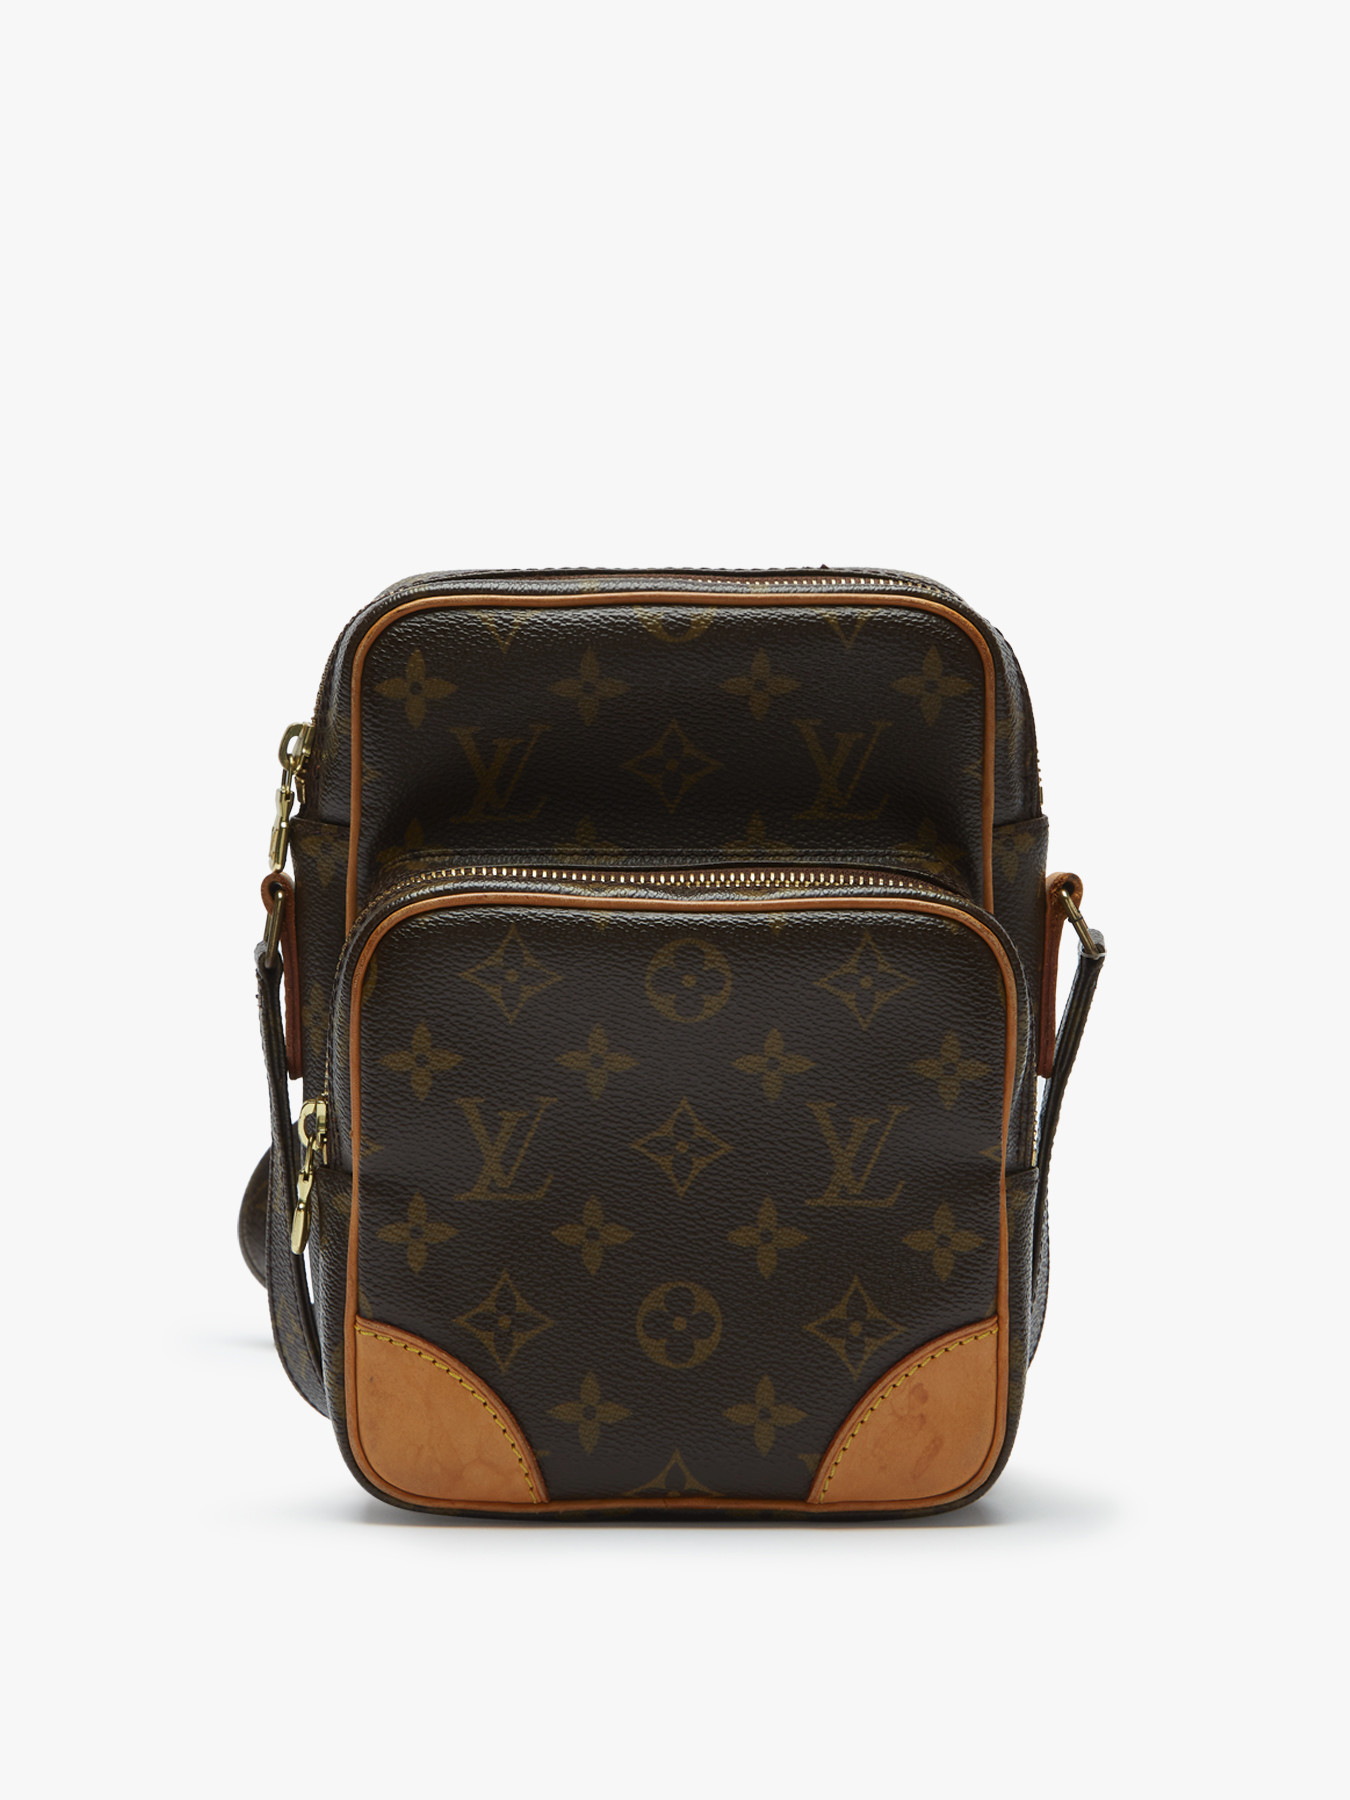 Louis+Vuitton+Utility+Crossbody+Small+Brown+Canvas+Monogram for sale online